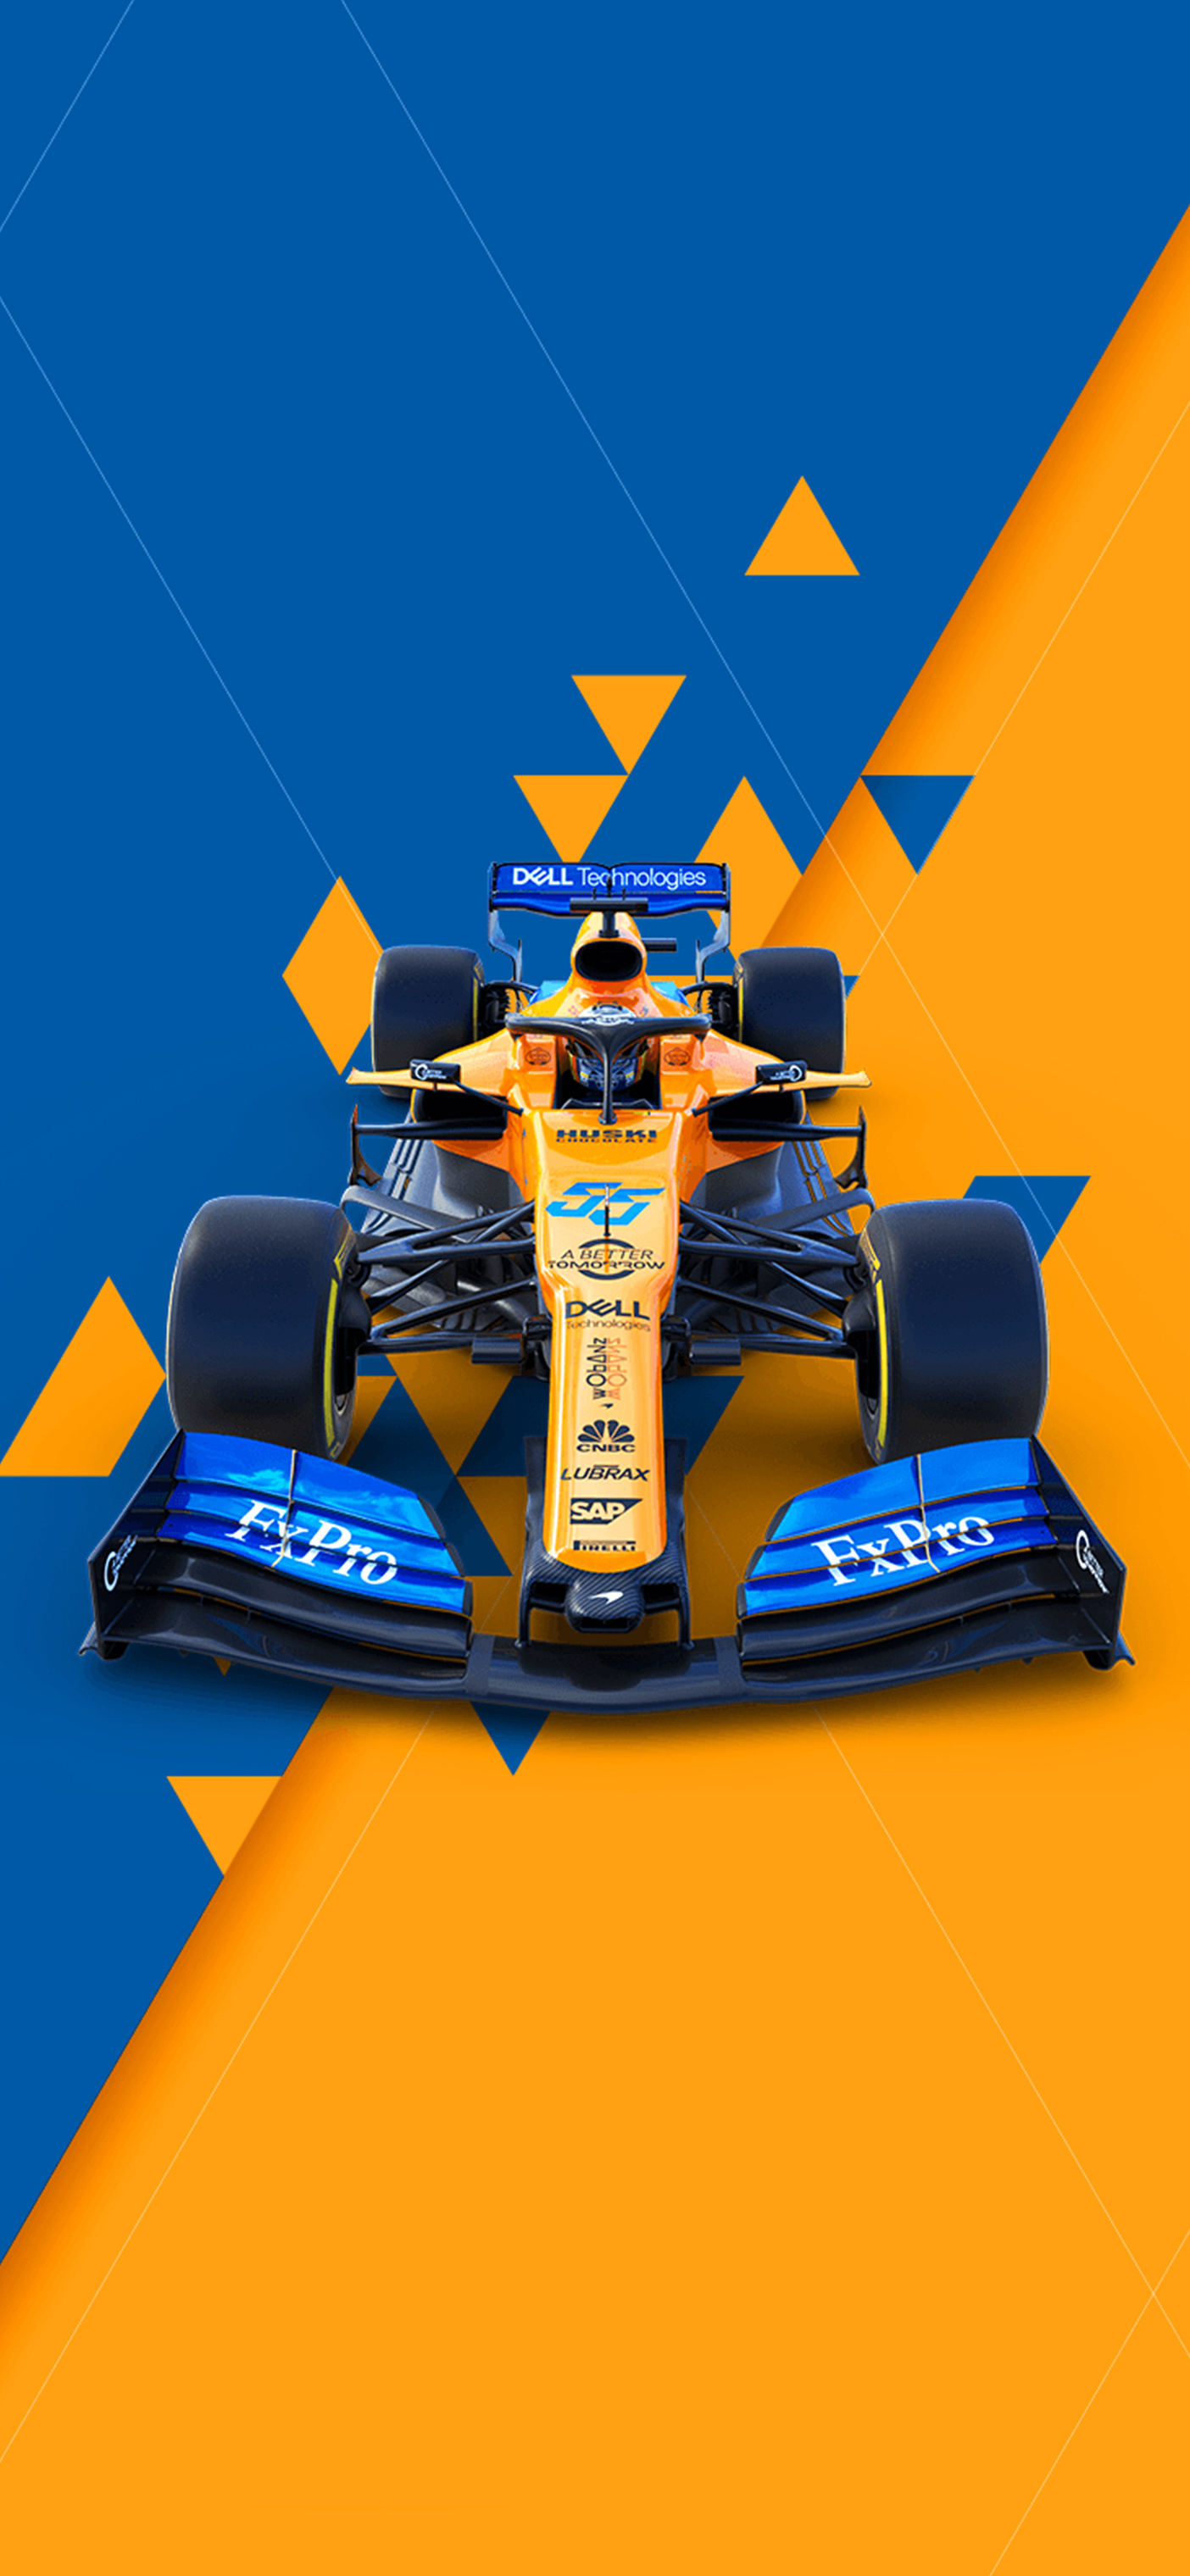 Formula 1: The highest class of single-seat auto racing that is supervised by the Federation Internationale de l'Automobile. 1410x3040 HD Wallpaper.